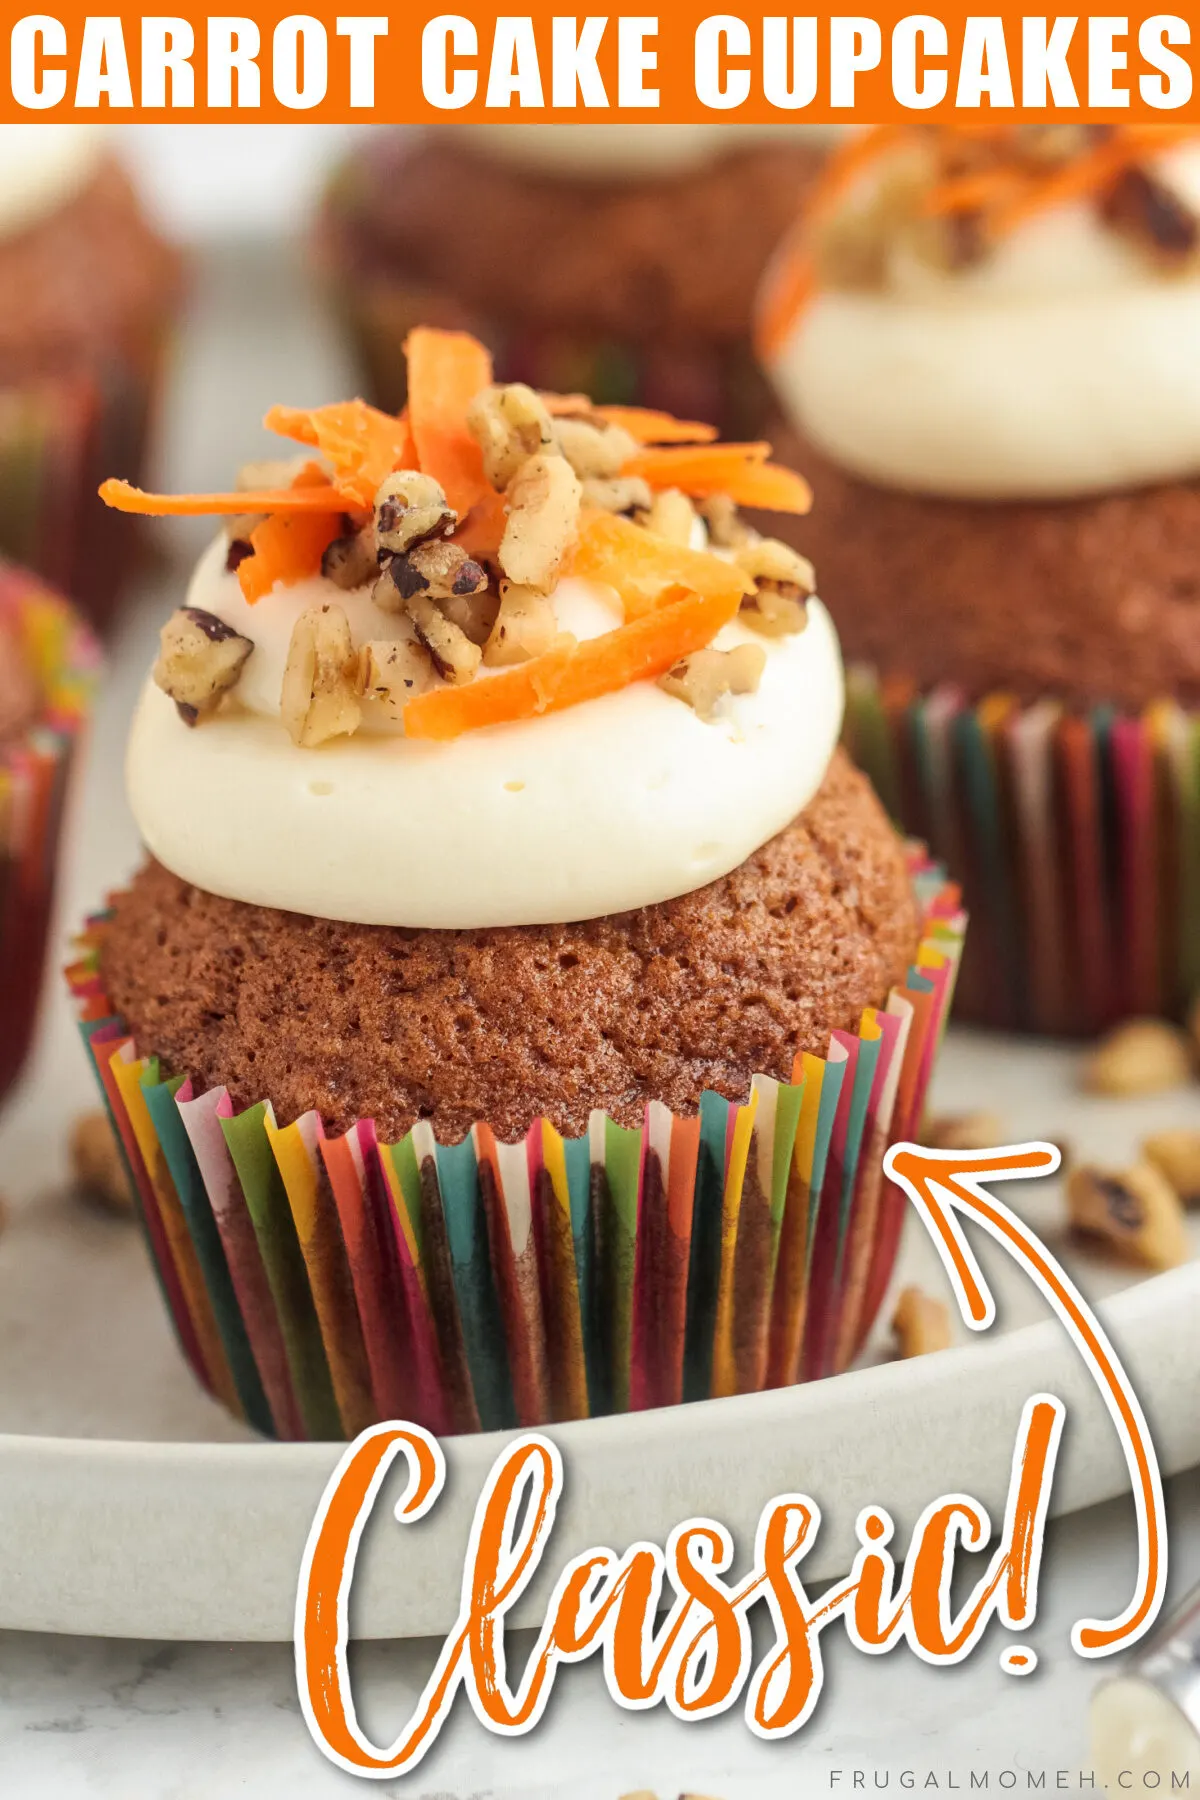 These easy carrot cake cupcakes are soft, moist, and lightly spiced. They are simply delicious topped with homemade cream cheese frosting!